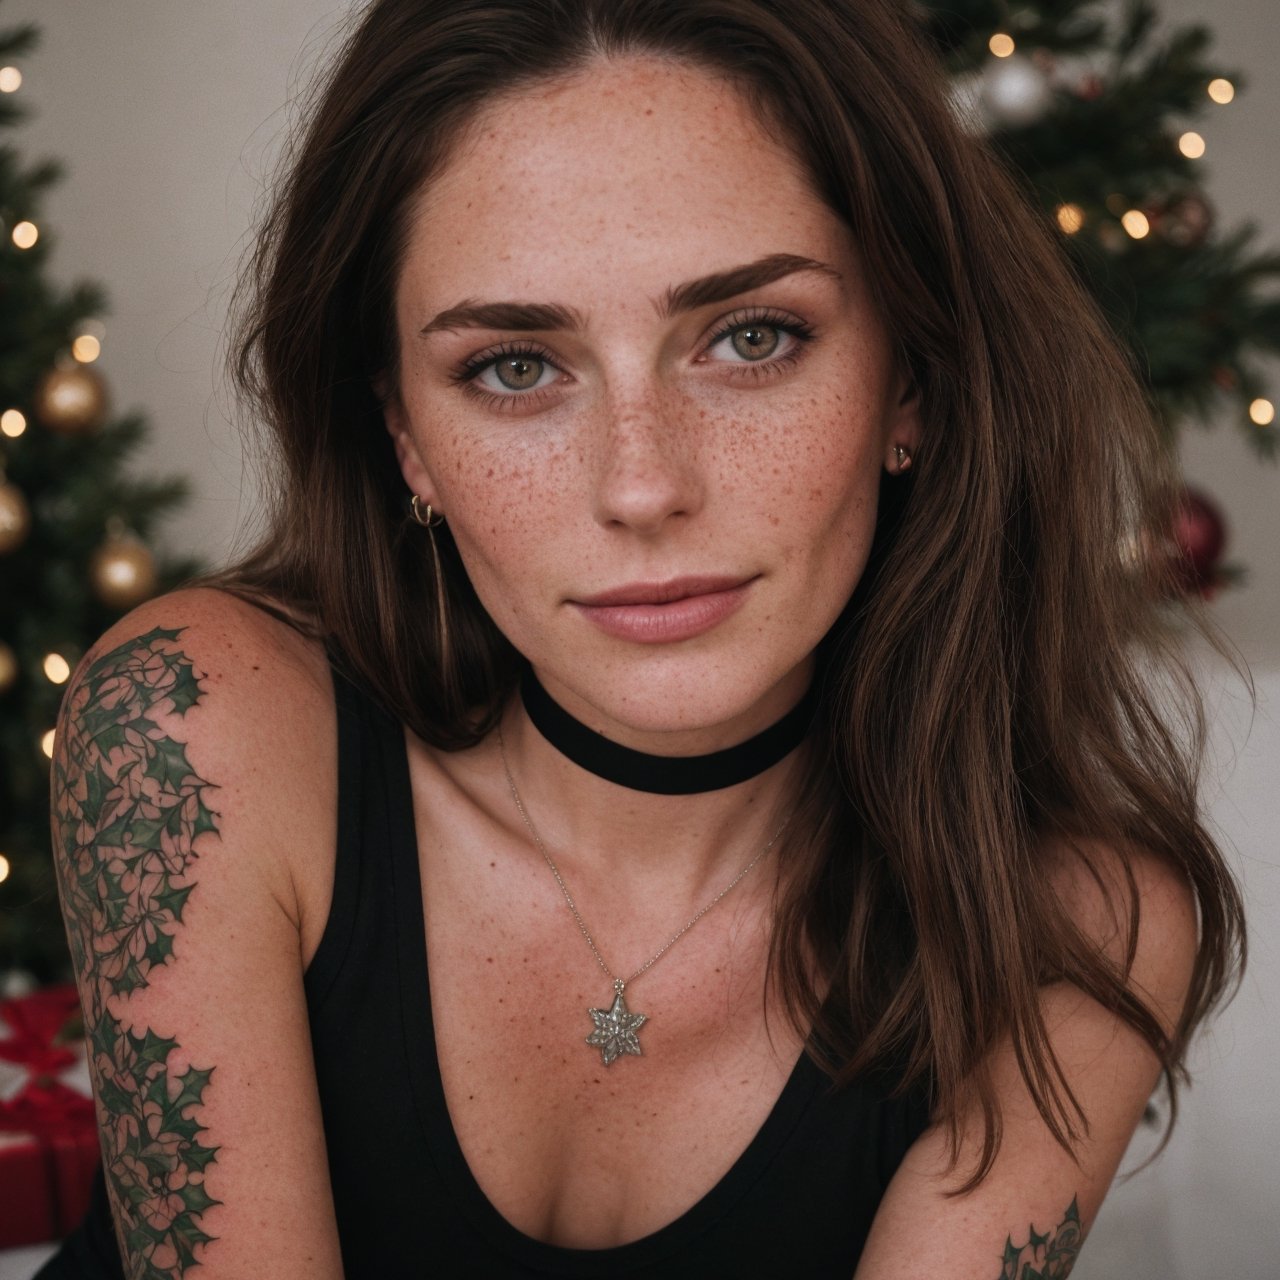 make the background look like a family gathering on christmas, christmas tree in the background, candle light full-length picture, warm lighting, medium hair, detailed face, detailed nose, woman wearing tank top, freckles, collar or choker, smirk, tattoo, realism, realistic, raw, analog, woman, portrait, photorealistic, analog ,realism